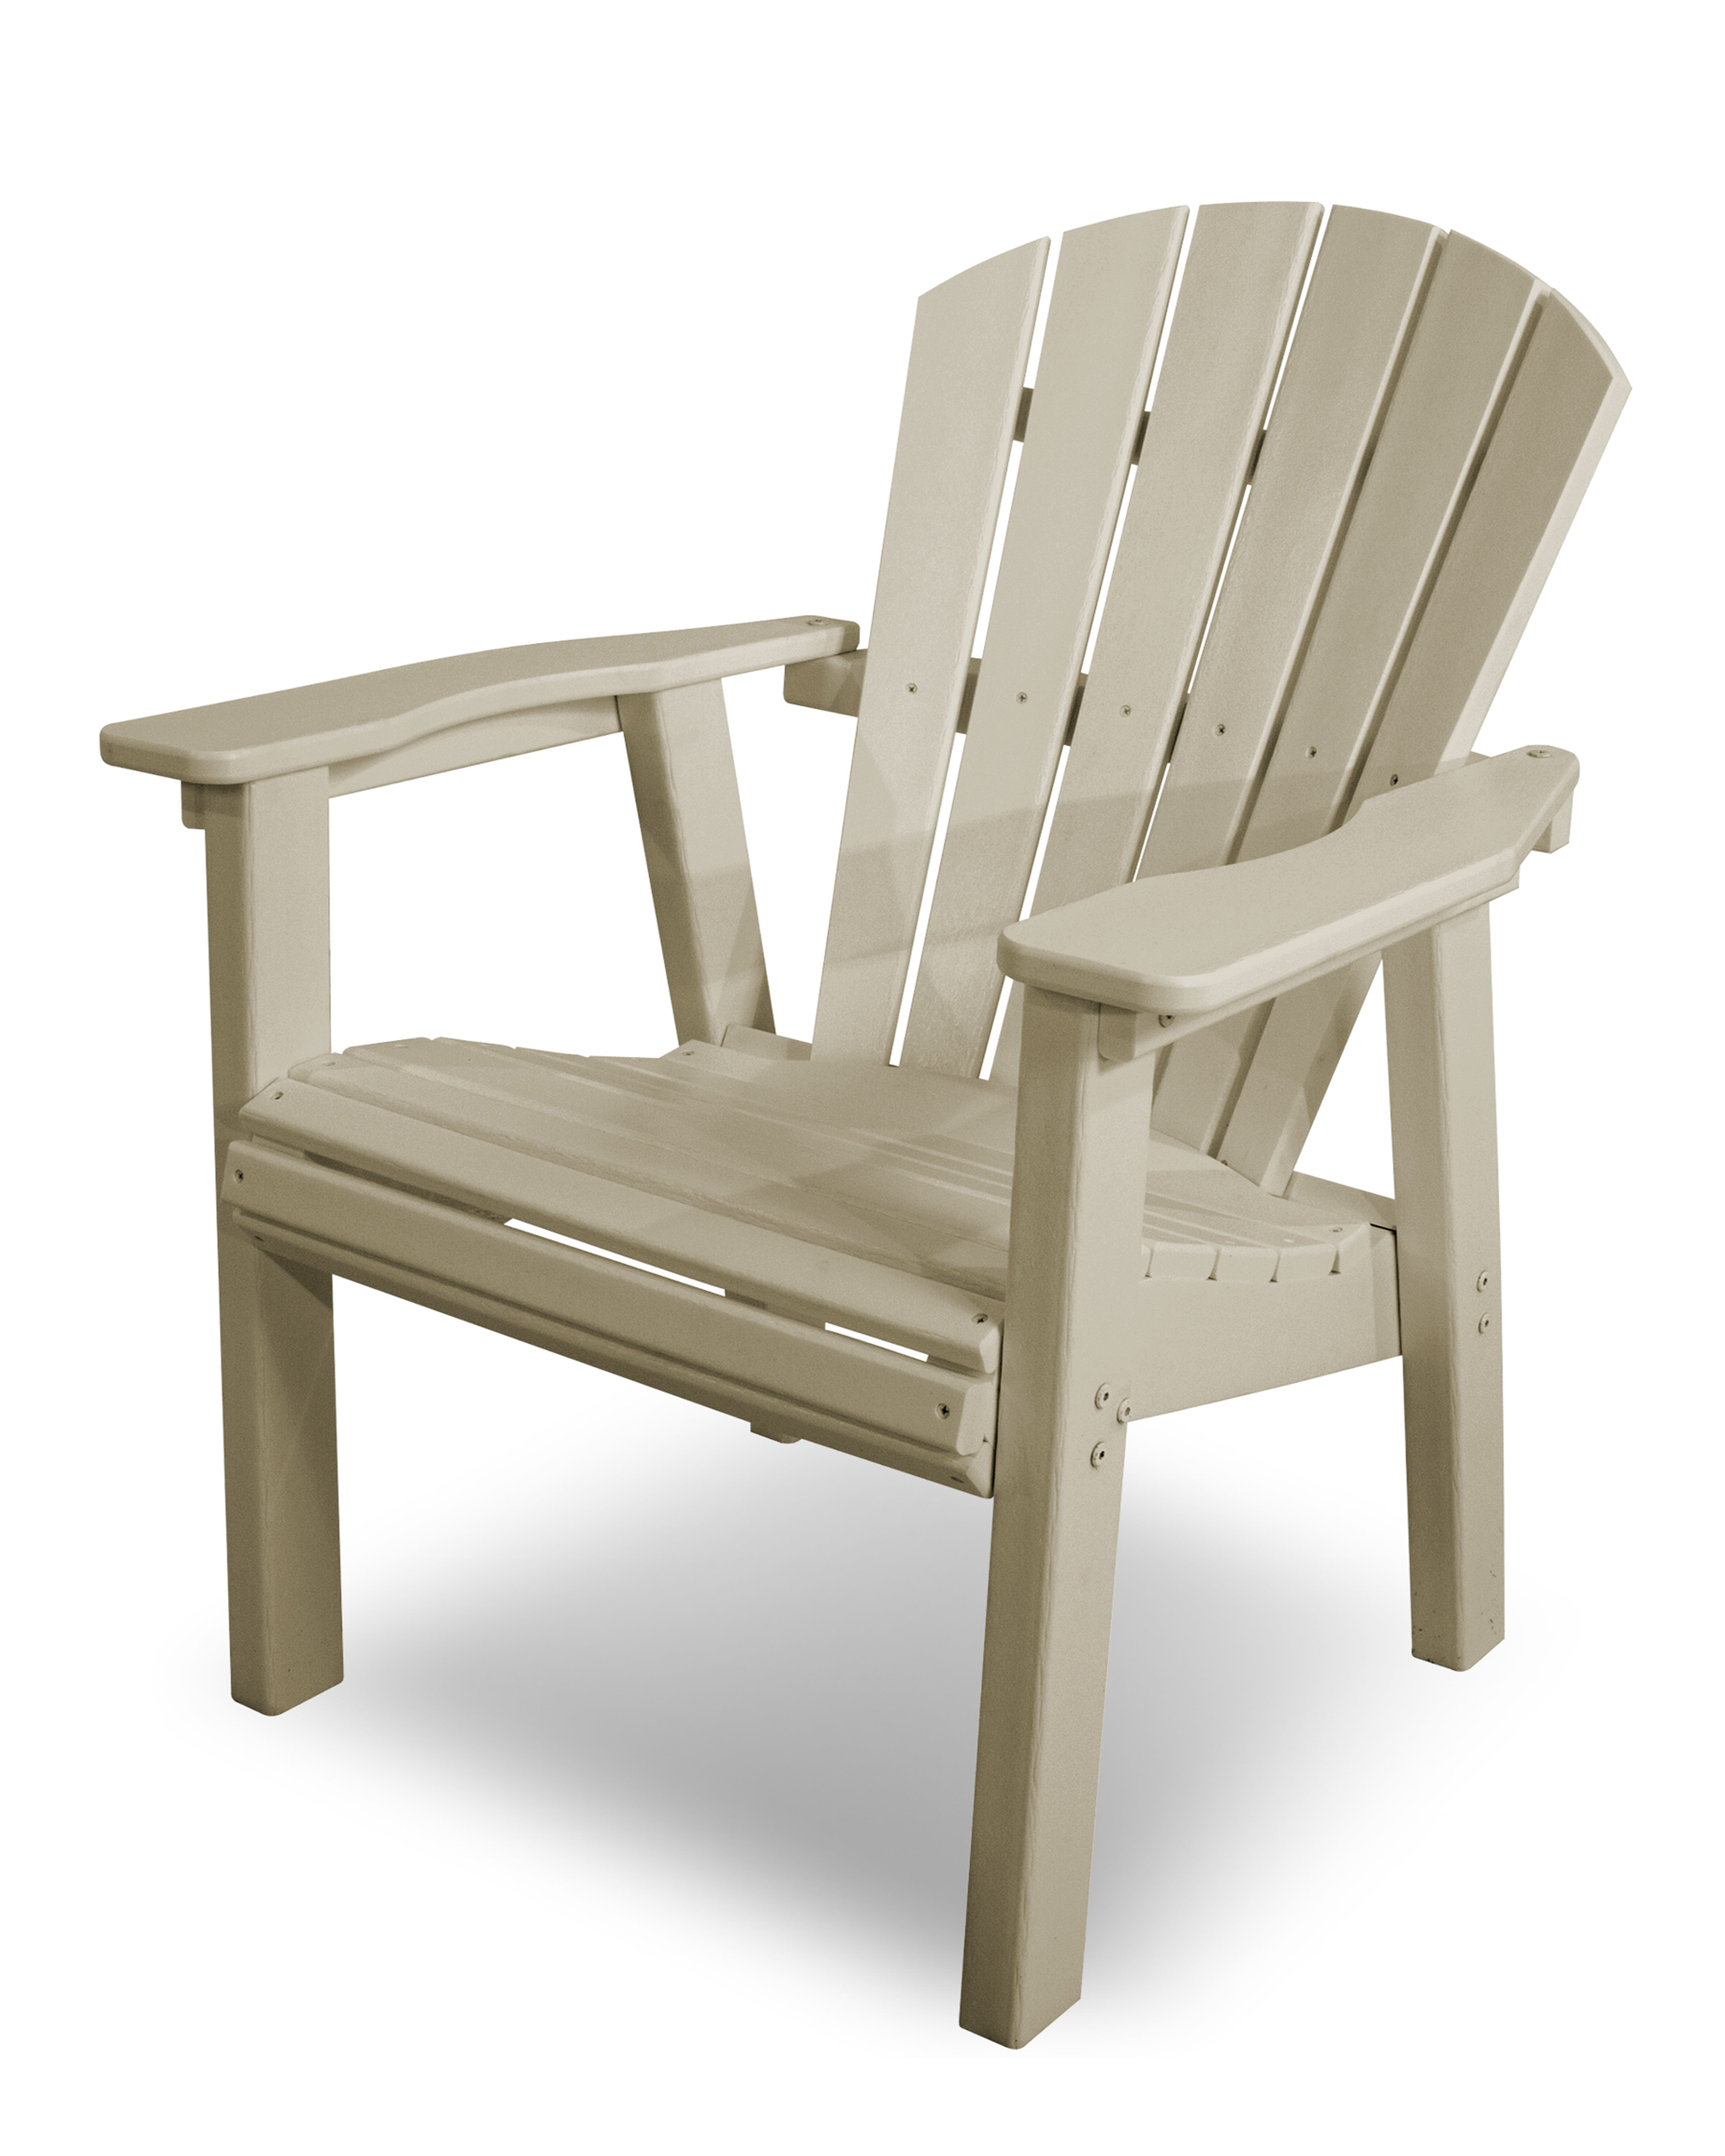  Polywood South Beach Casual Chair for Living room